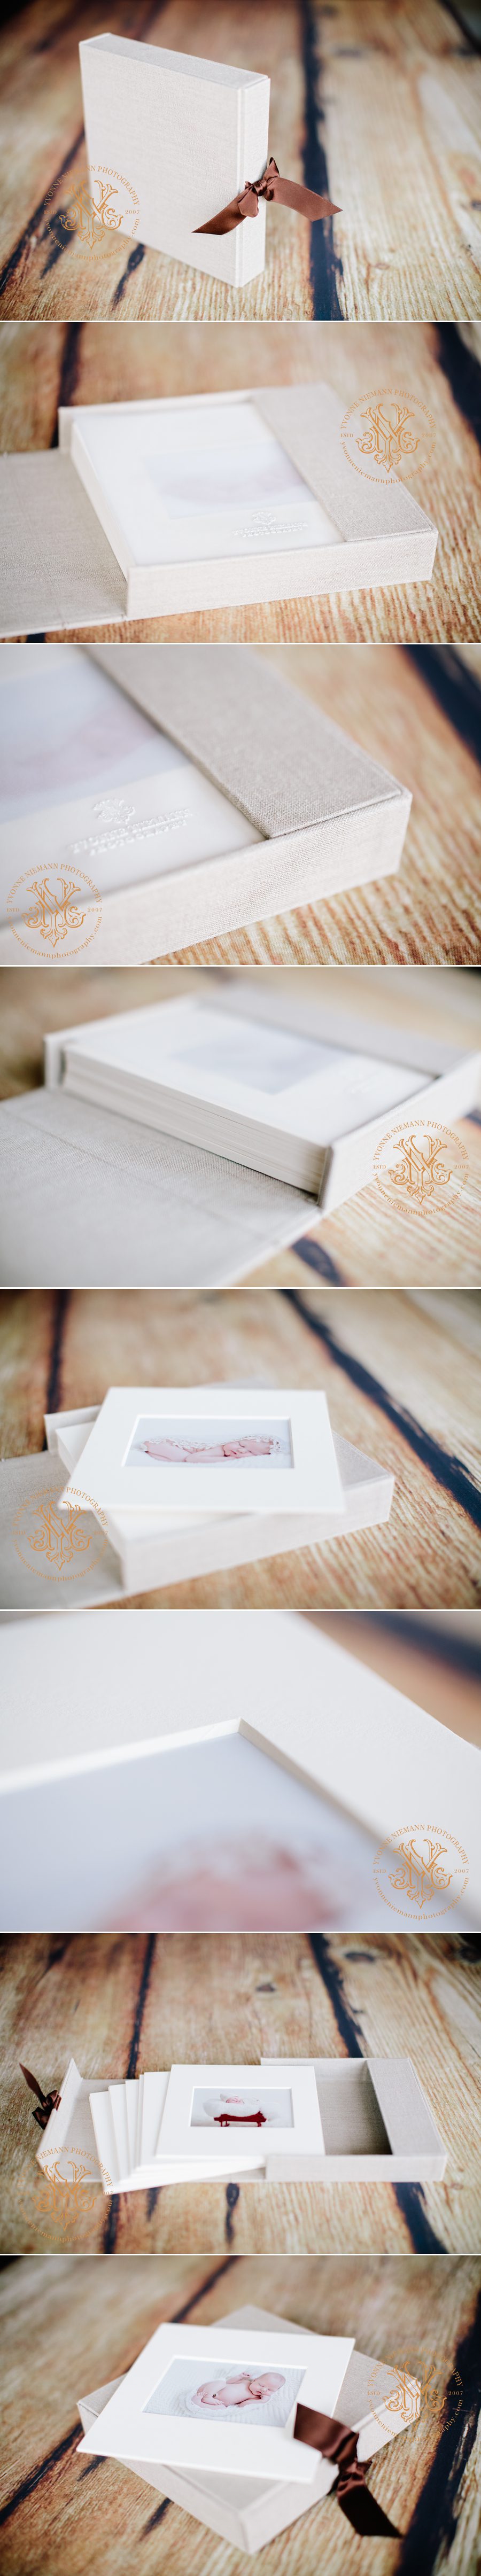 Heirloom portrait products offered by St. Louis Newborn Photographer, Yvonne Niemann Photography.